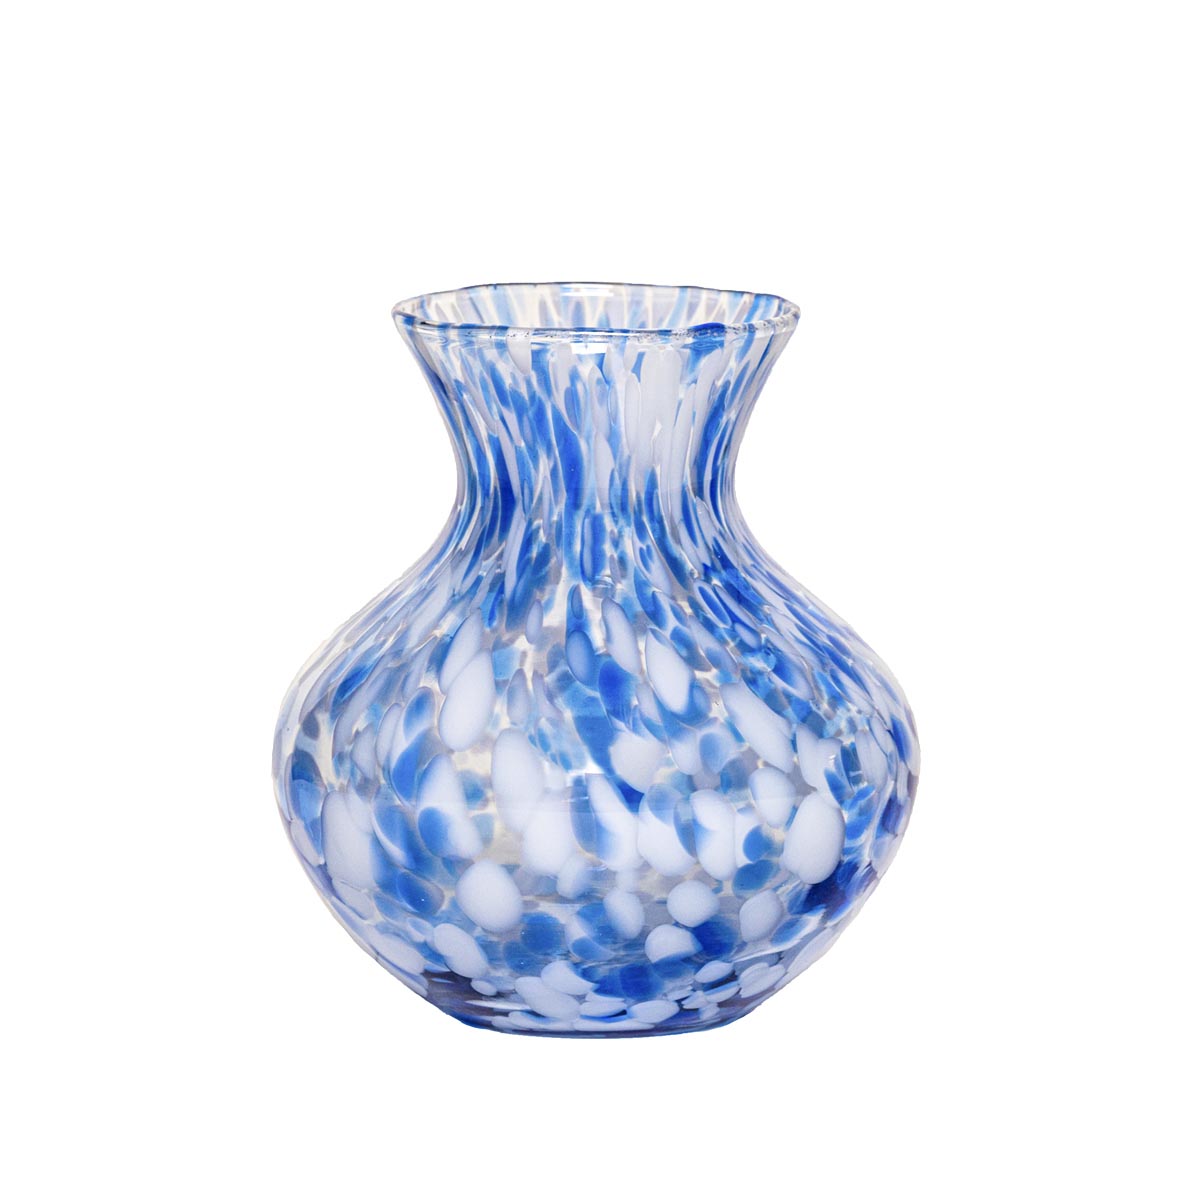 Our eye-catching vases feature gorgeous glass artistry in all their translucent and speckled splendor -- yet seamlessly mix and match with absolutely everything. Garden roses, bunches of cultivated tulips, handfuls of herbs -- you name it – these vessels are perennially stylish, chic, and flourish absolutely anywhere.